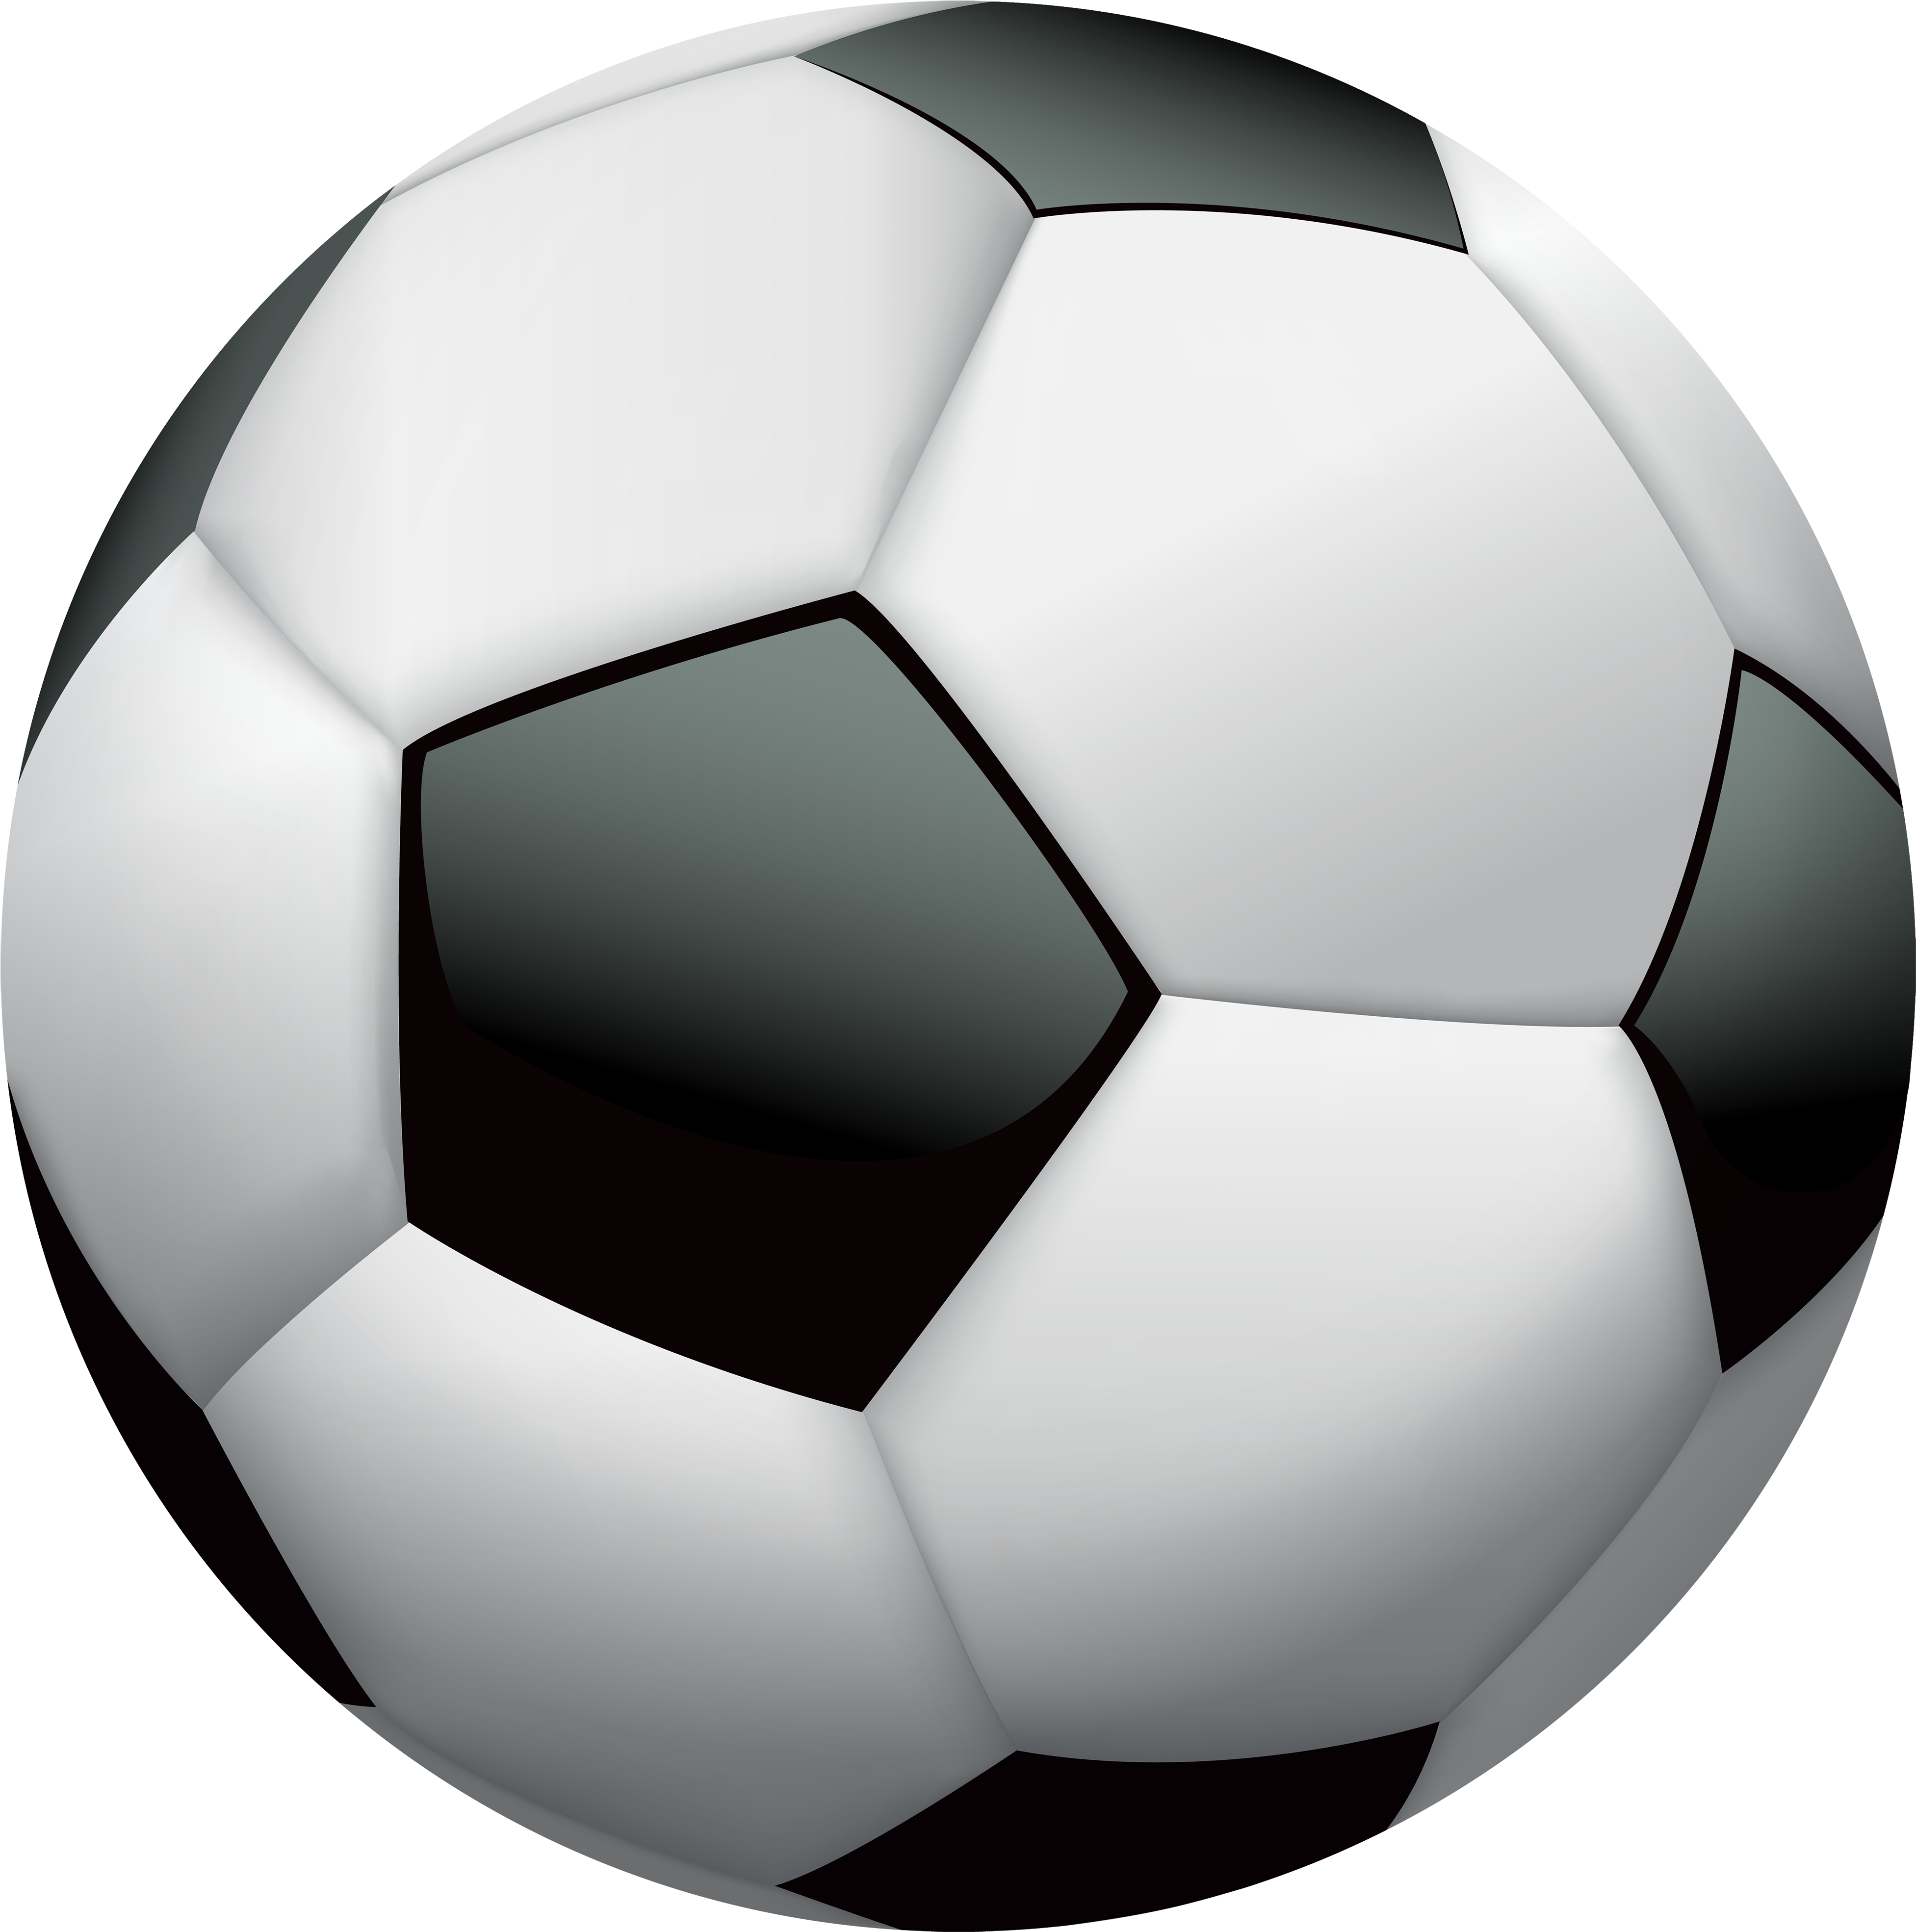 Soccer Ball Soccer Clipart 9 Clipartcow Cliparting Soccer